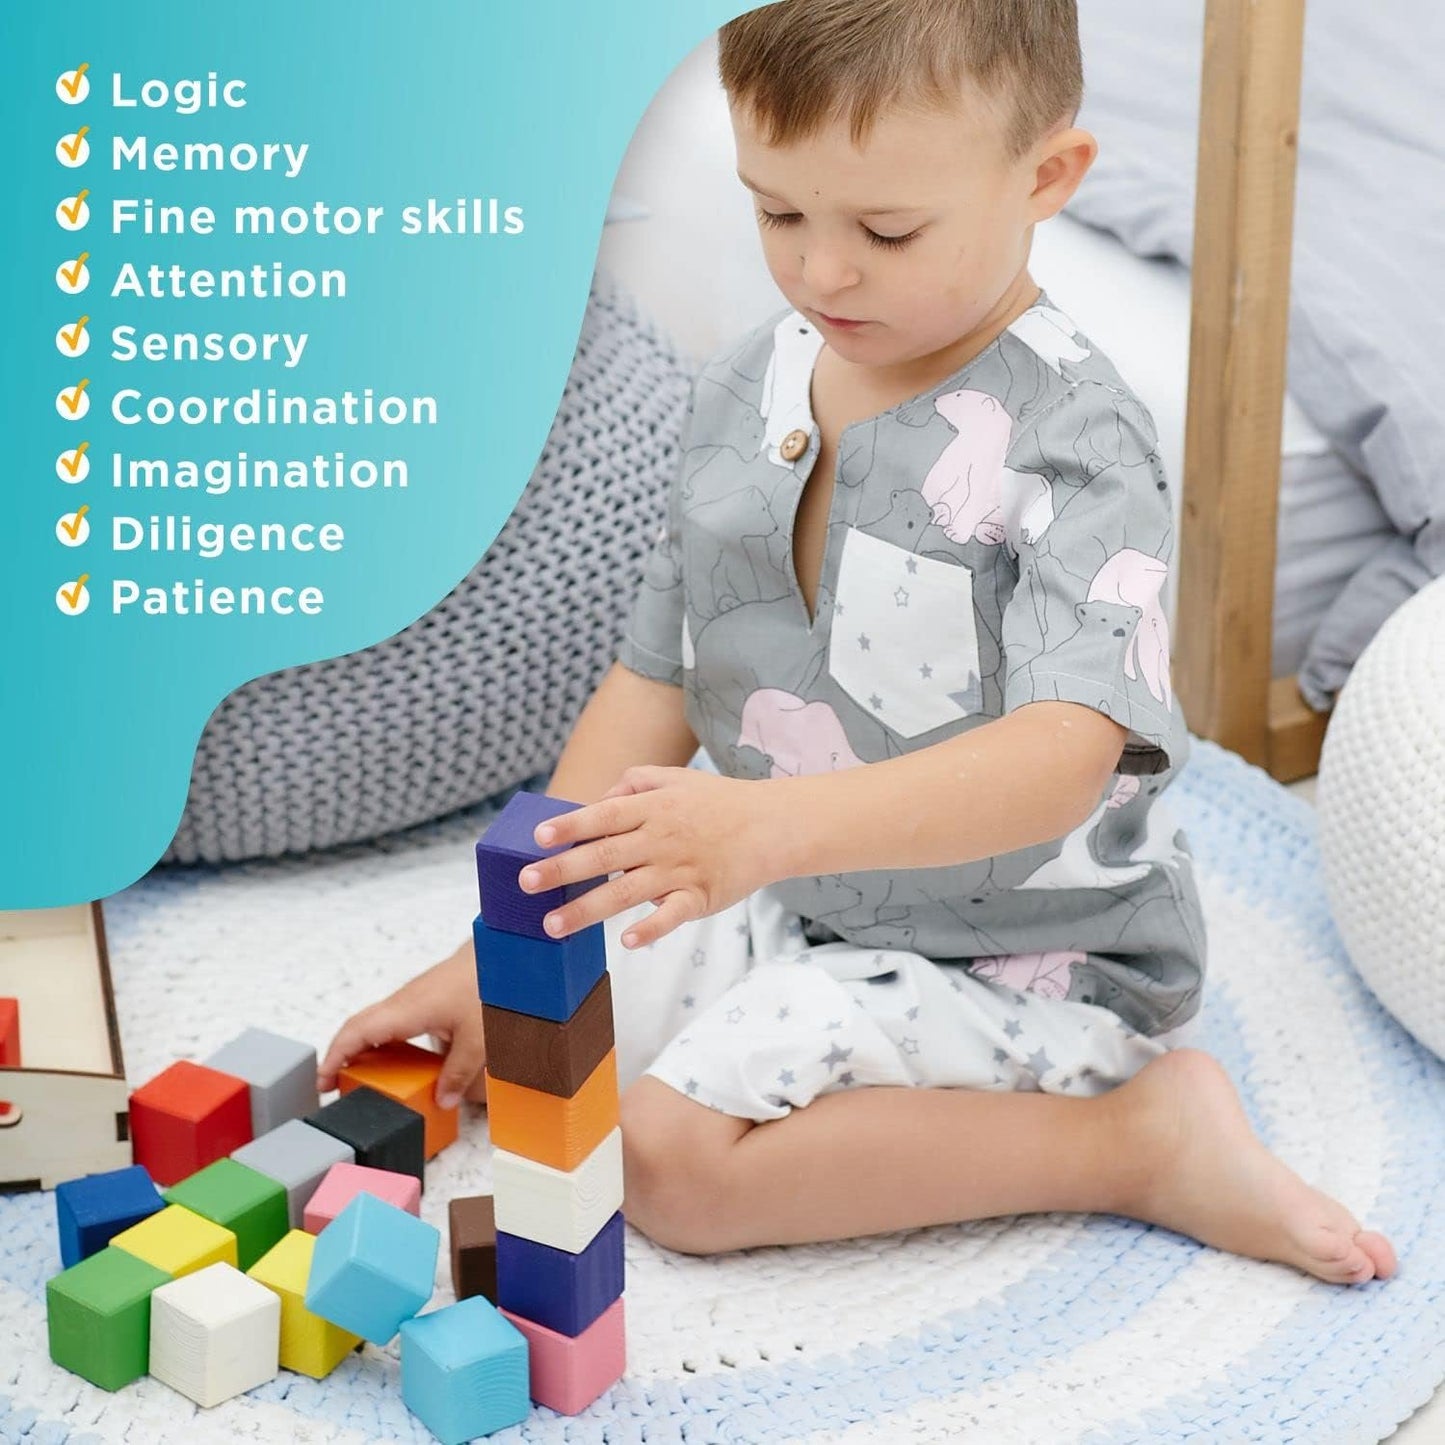 Ulanik Large Colored Cubes Toddler Montessori Toys for 3+ Wooden Building Blocks Game for Learning Color Sorting and Counting